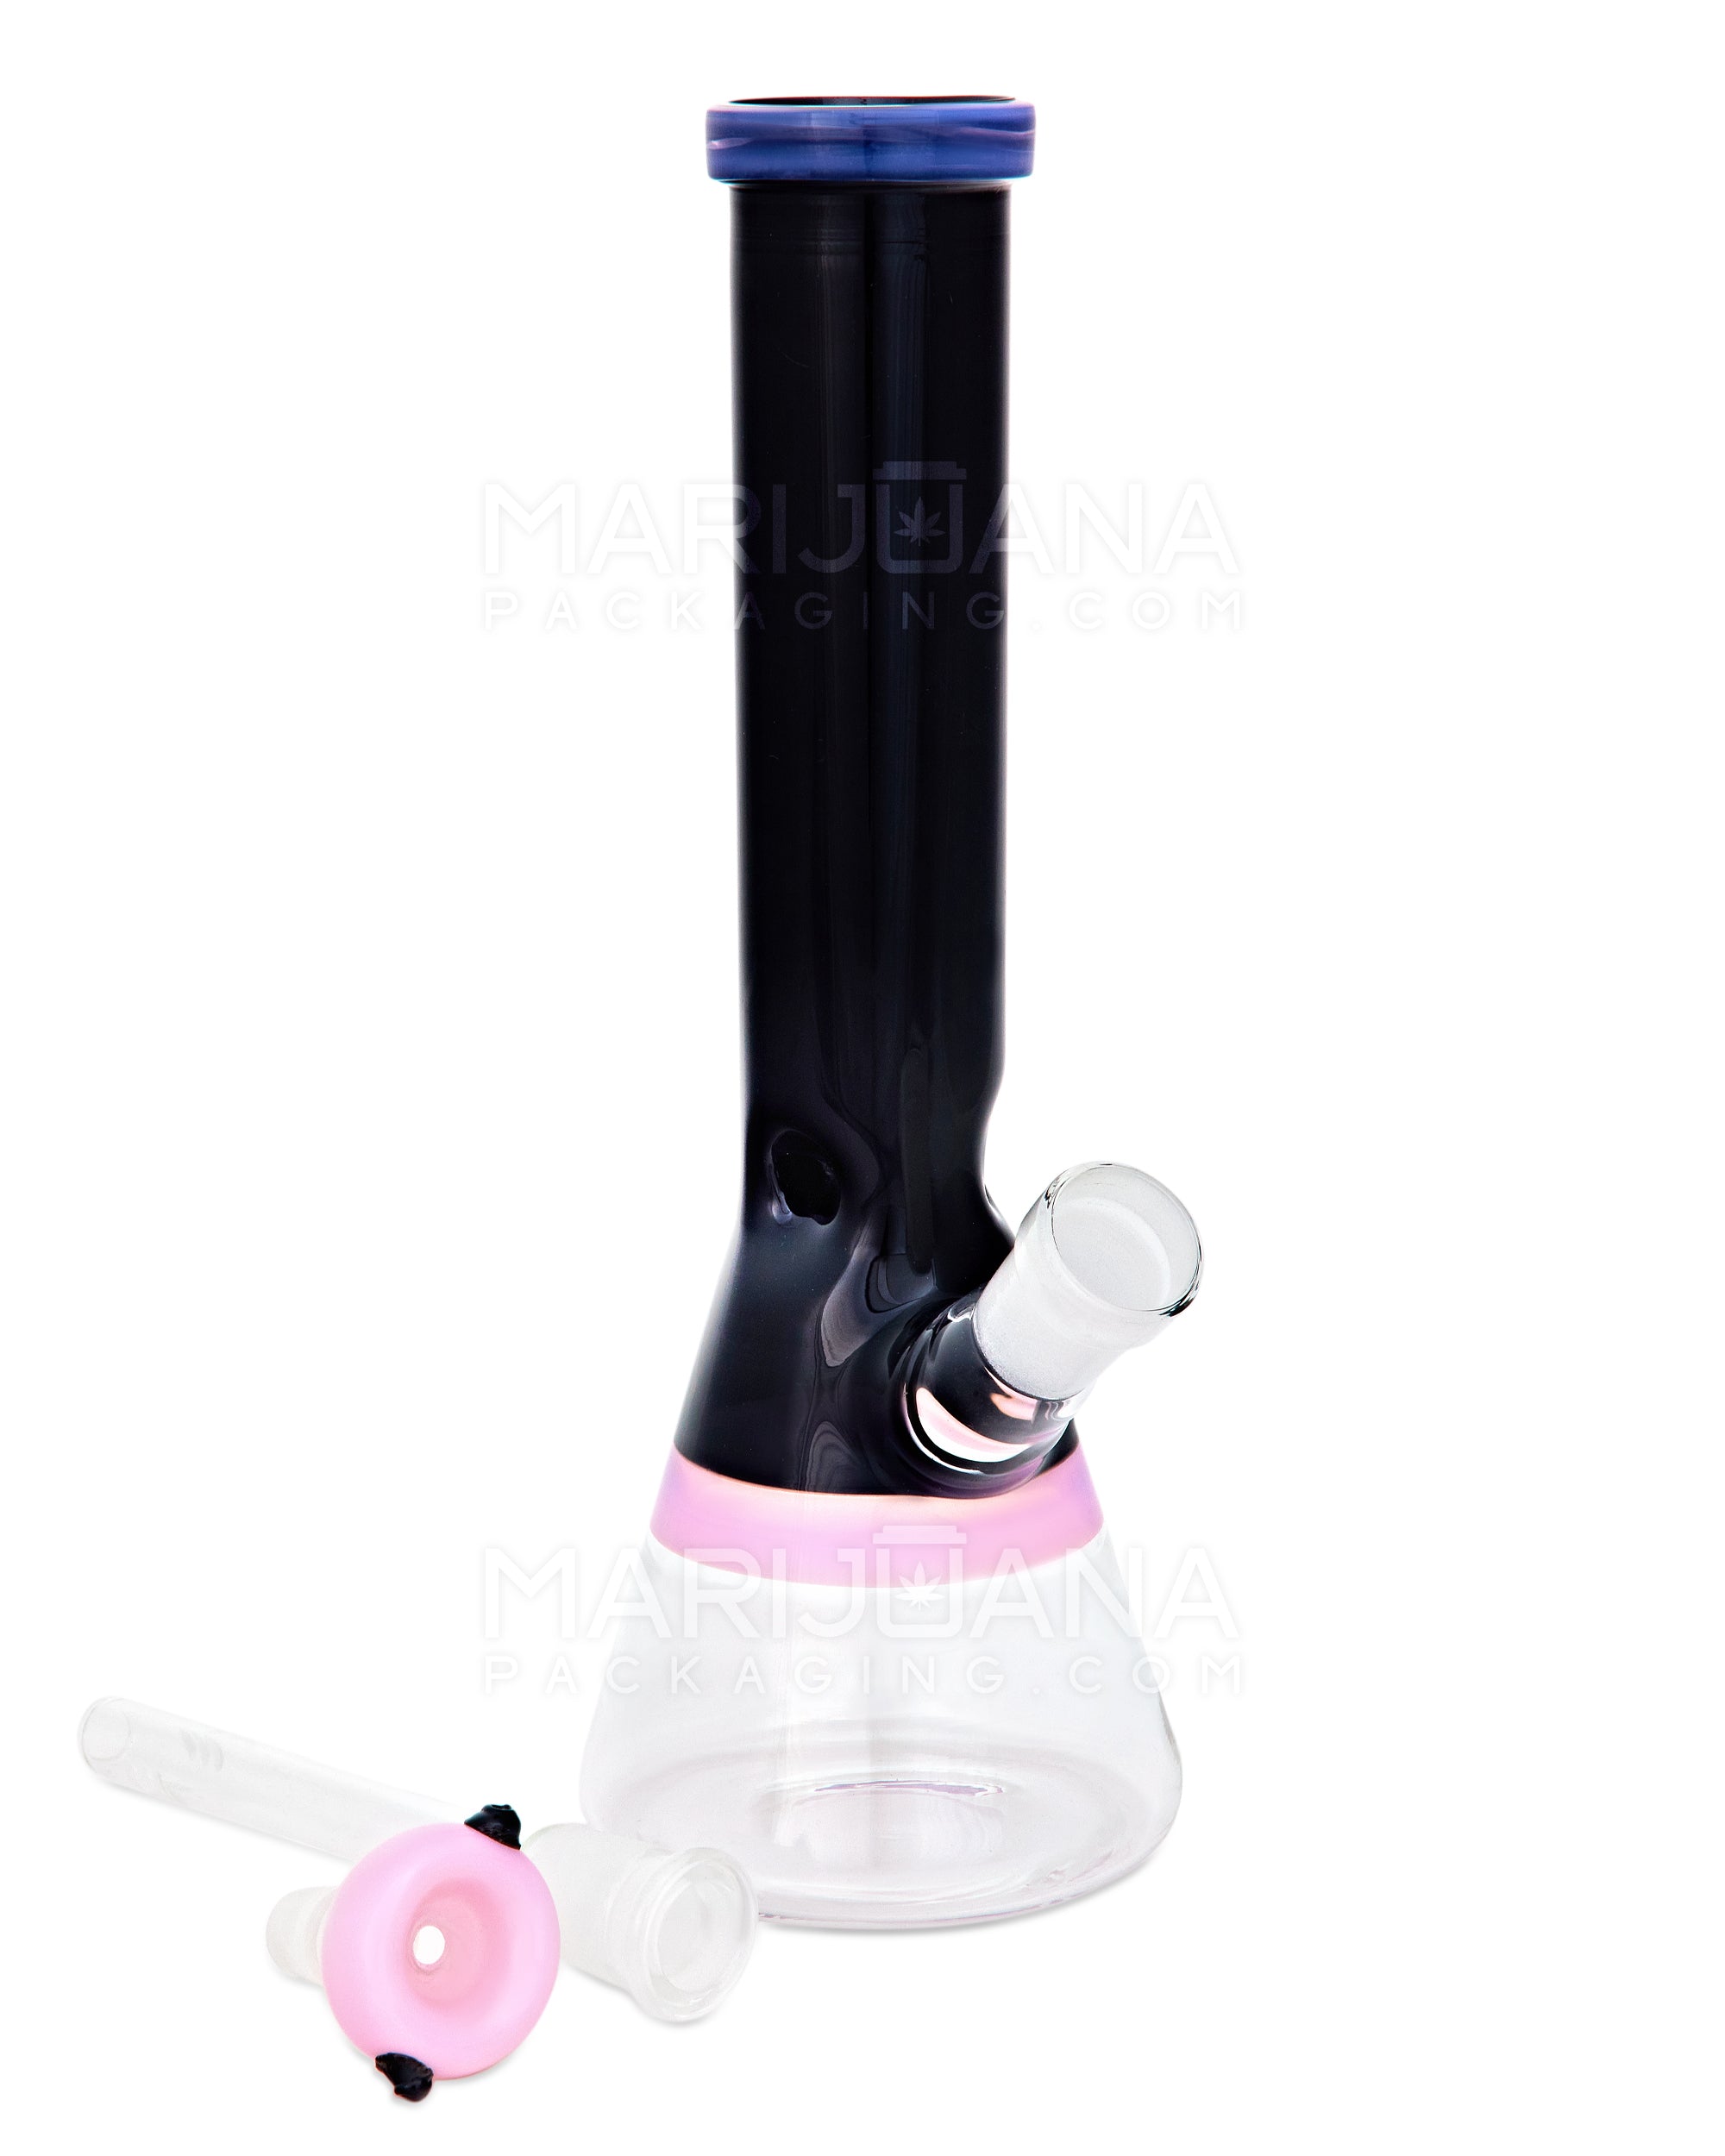 Painted Straight Neck Diffused Downstem Glass Beaker Water Pipe | 10in Tall - 14mm Bowl - Pink & Black - 2